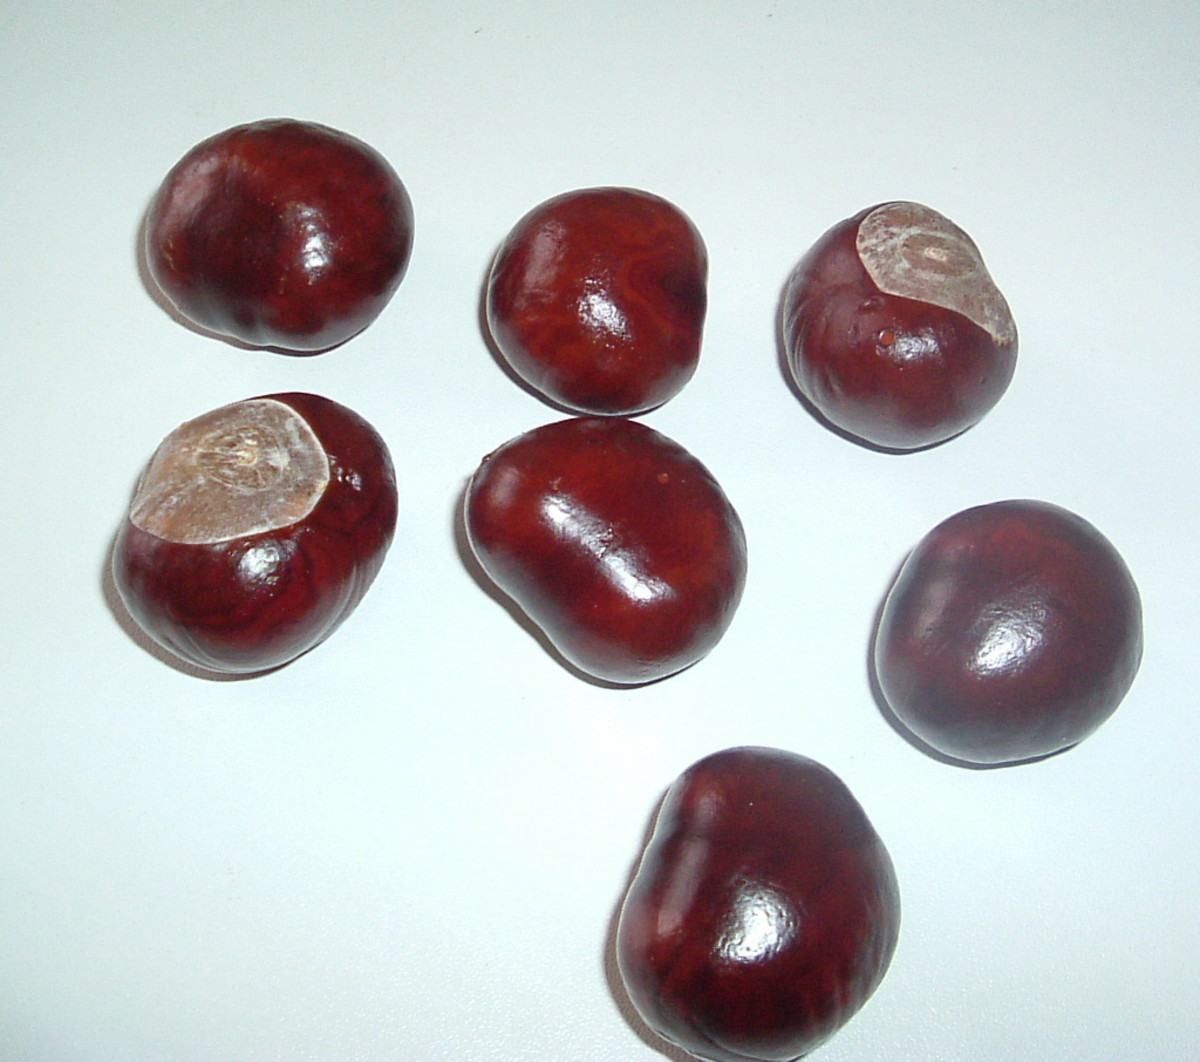 and conkers!